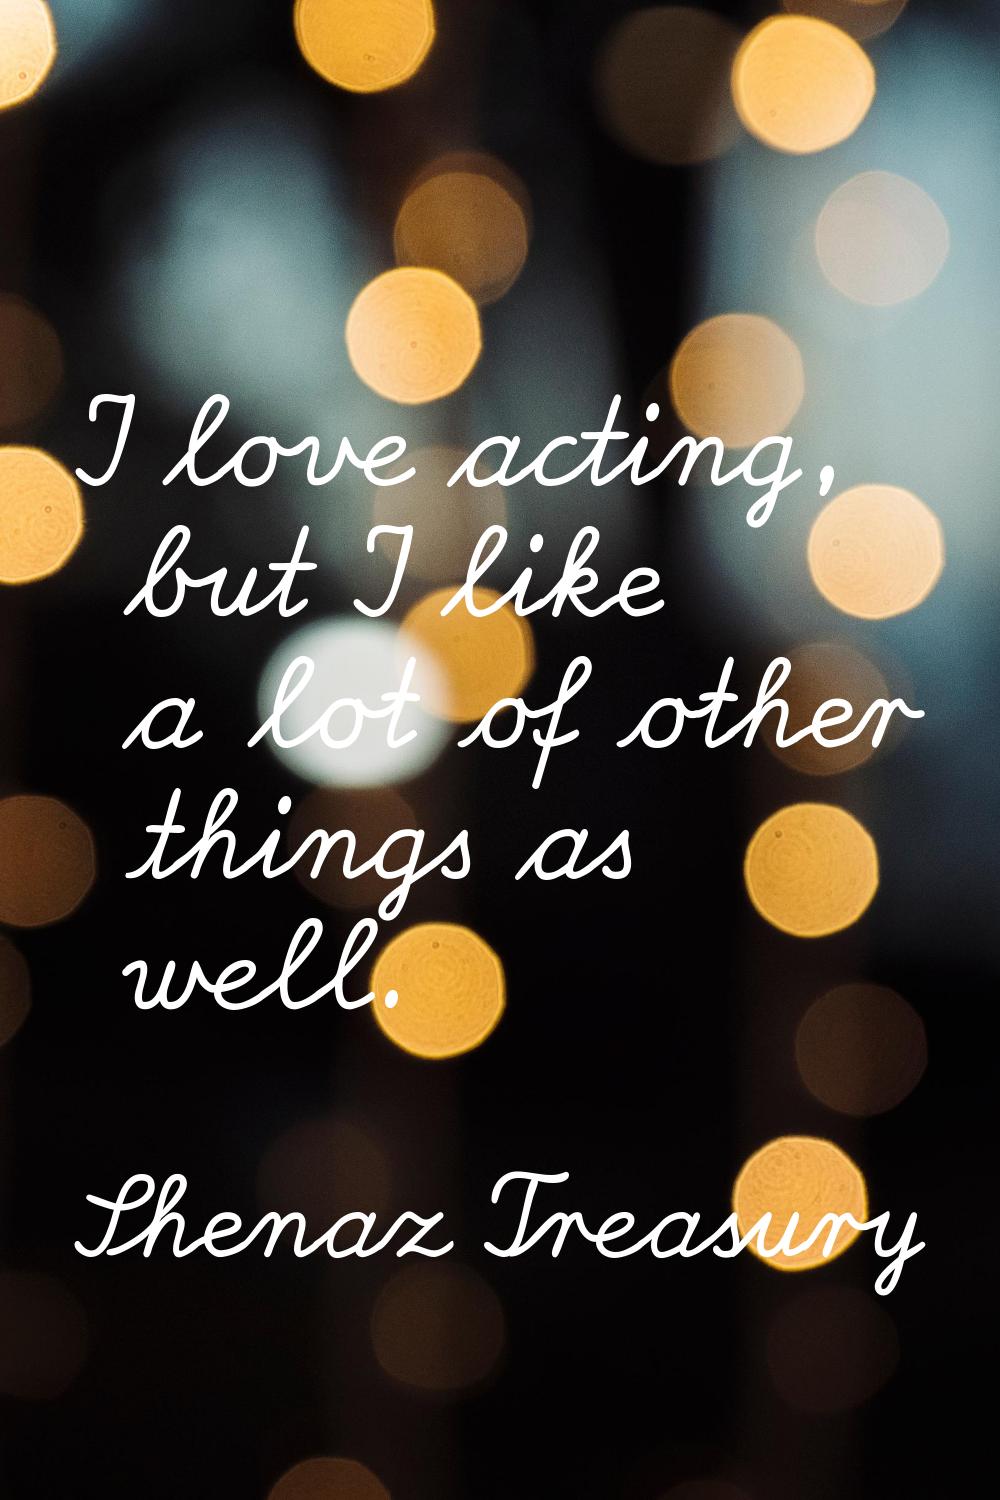 I love acting, but I like a lot of other things as well.